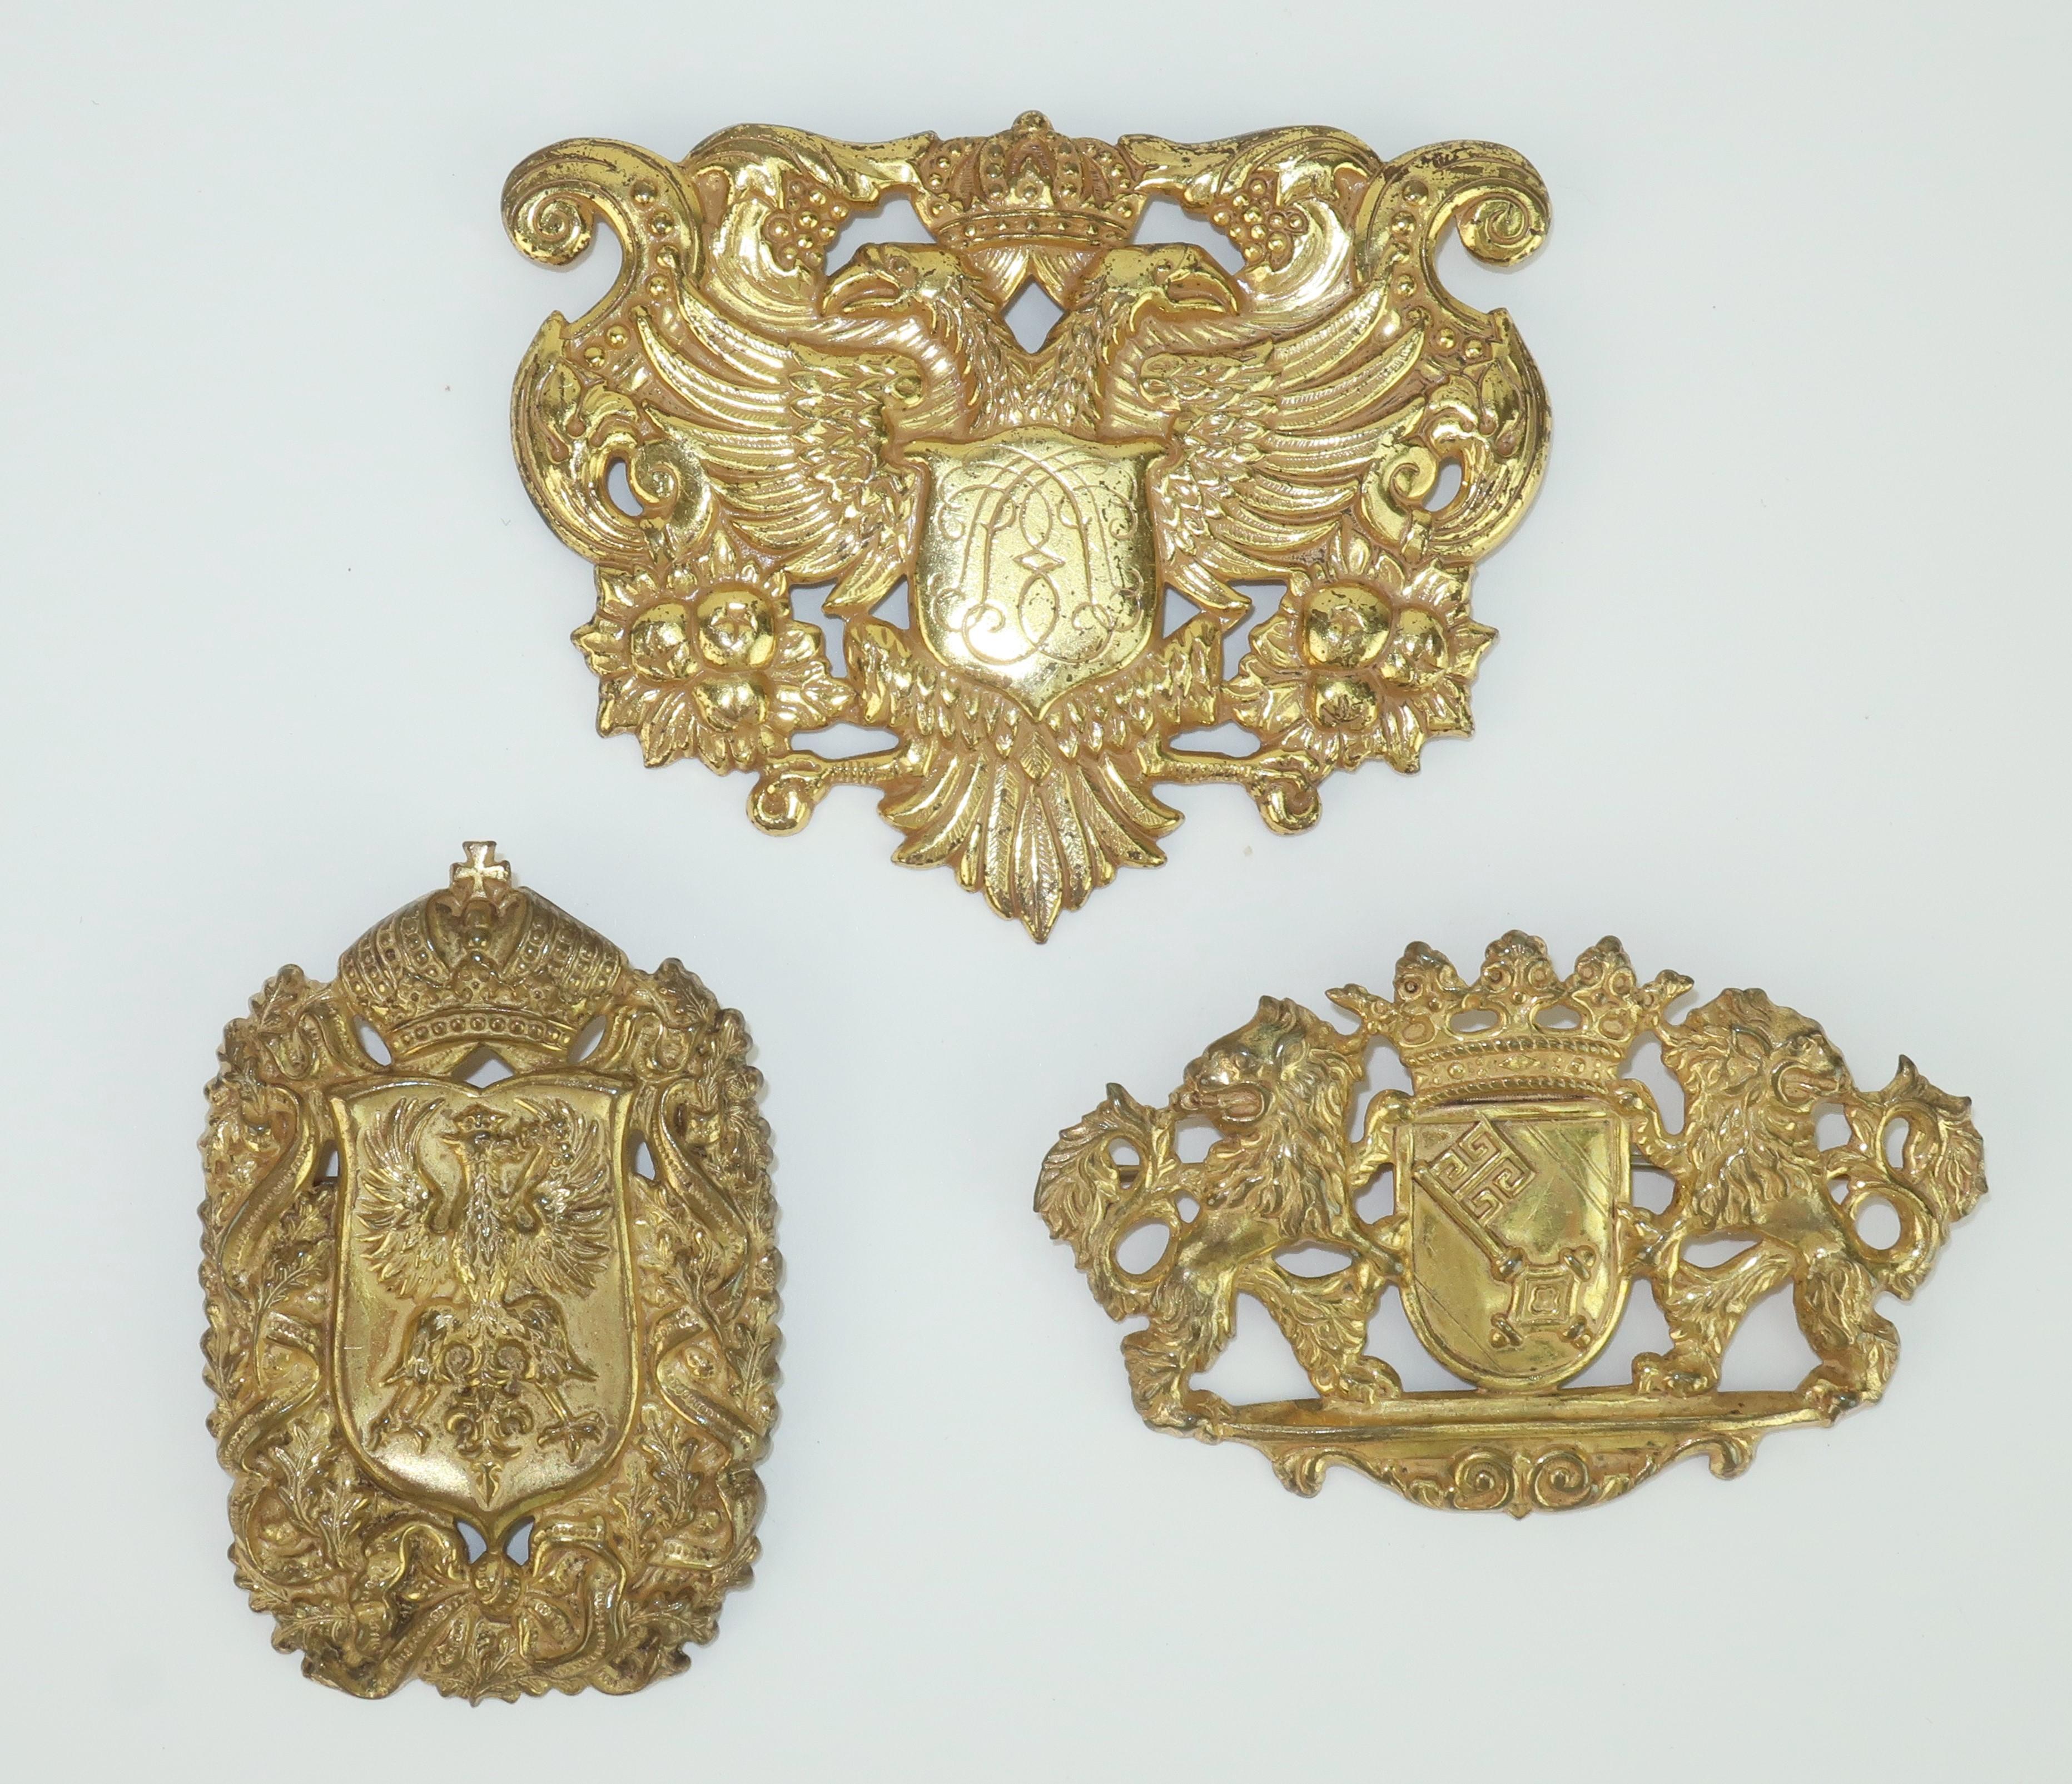 Collection of three 1950's Miriam Haskell medallion coat-of-arms brooches in a gilded metal with Victorian era details.  Each brooch appears to replicate a classic European coat-of-arms including lions, phoenix and eagle.  Outfitted with straight